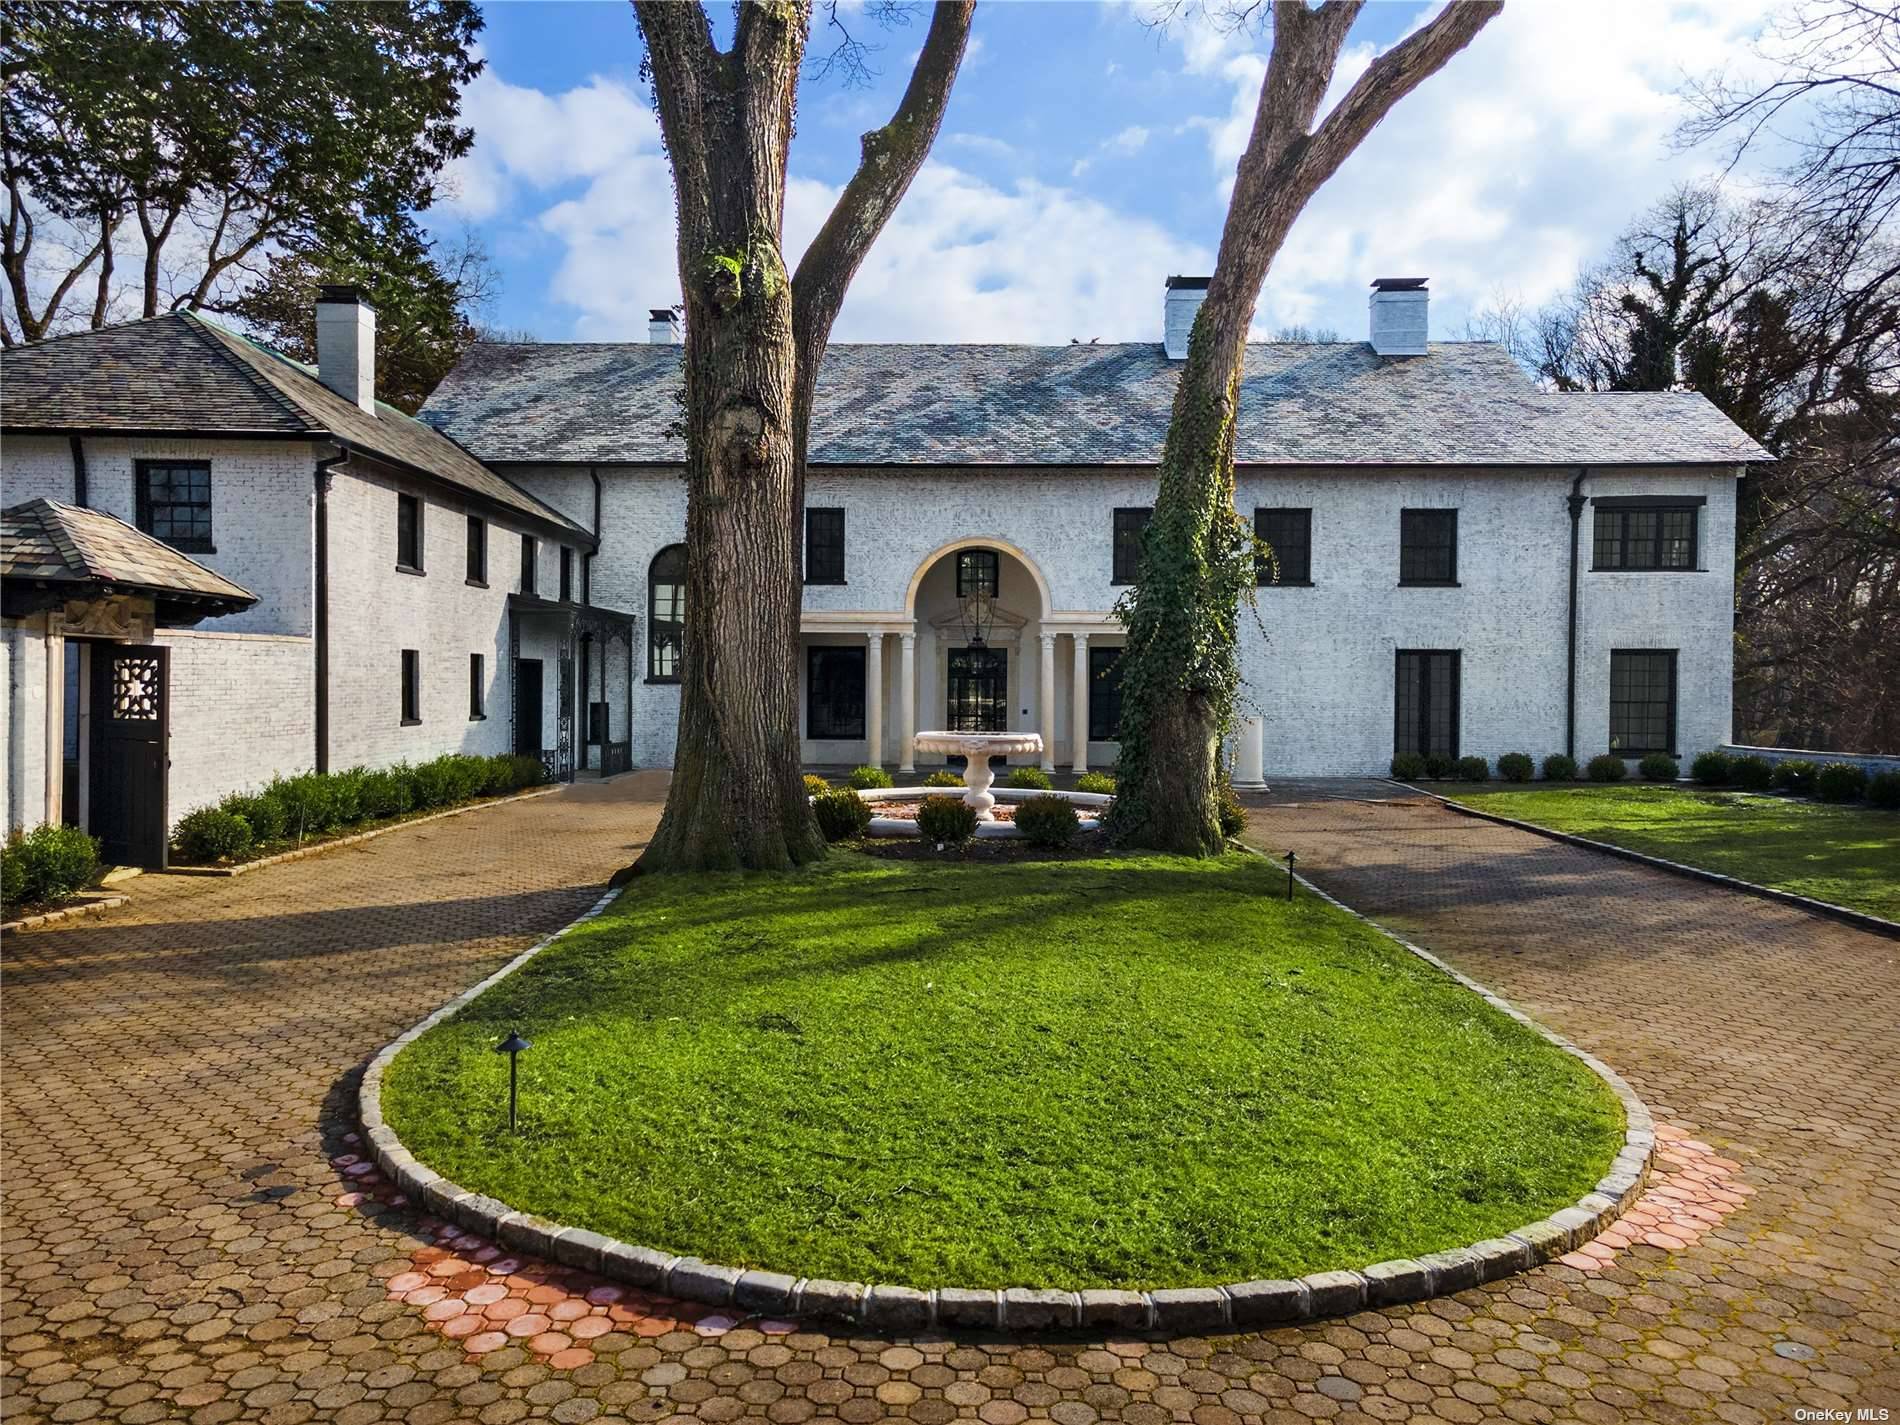 STONE ARCHES 'BAGATELLE. ' A one of a kind Gold Coast, Old Westbury Estate built by famed architect Thomas Hastings, for himself, in the early 1900's.